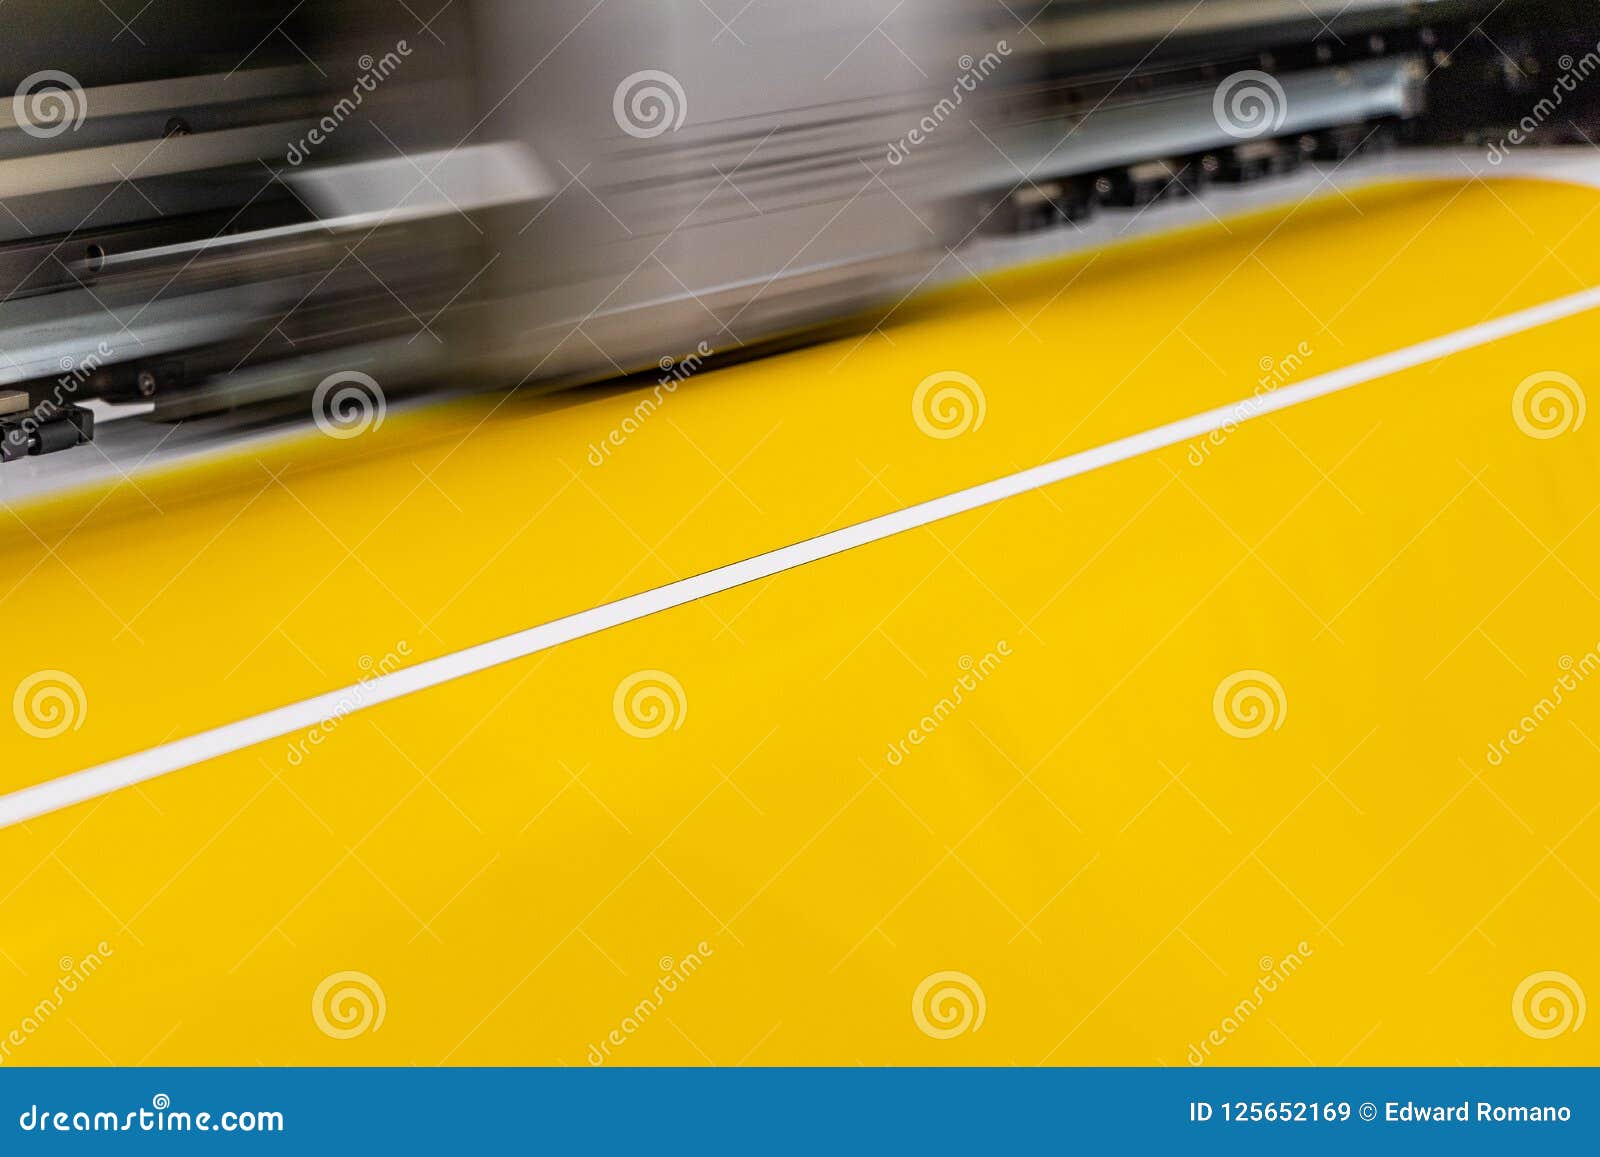 big professional printer, processing a large scale glossy sheet of yellow paper rolls for color sampling.